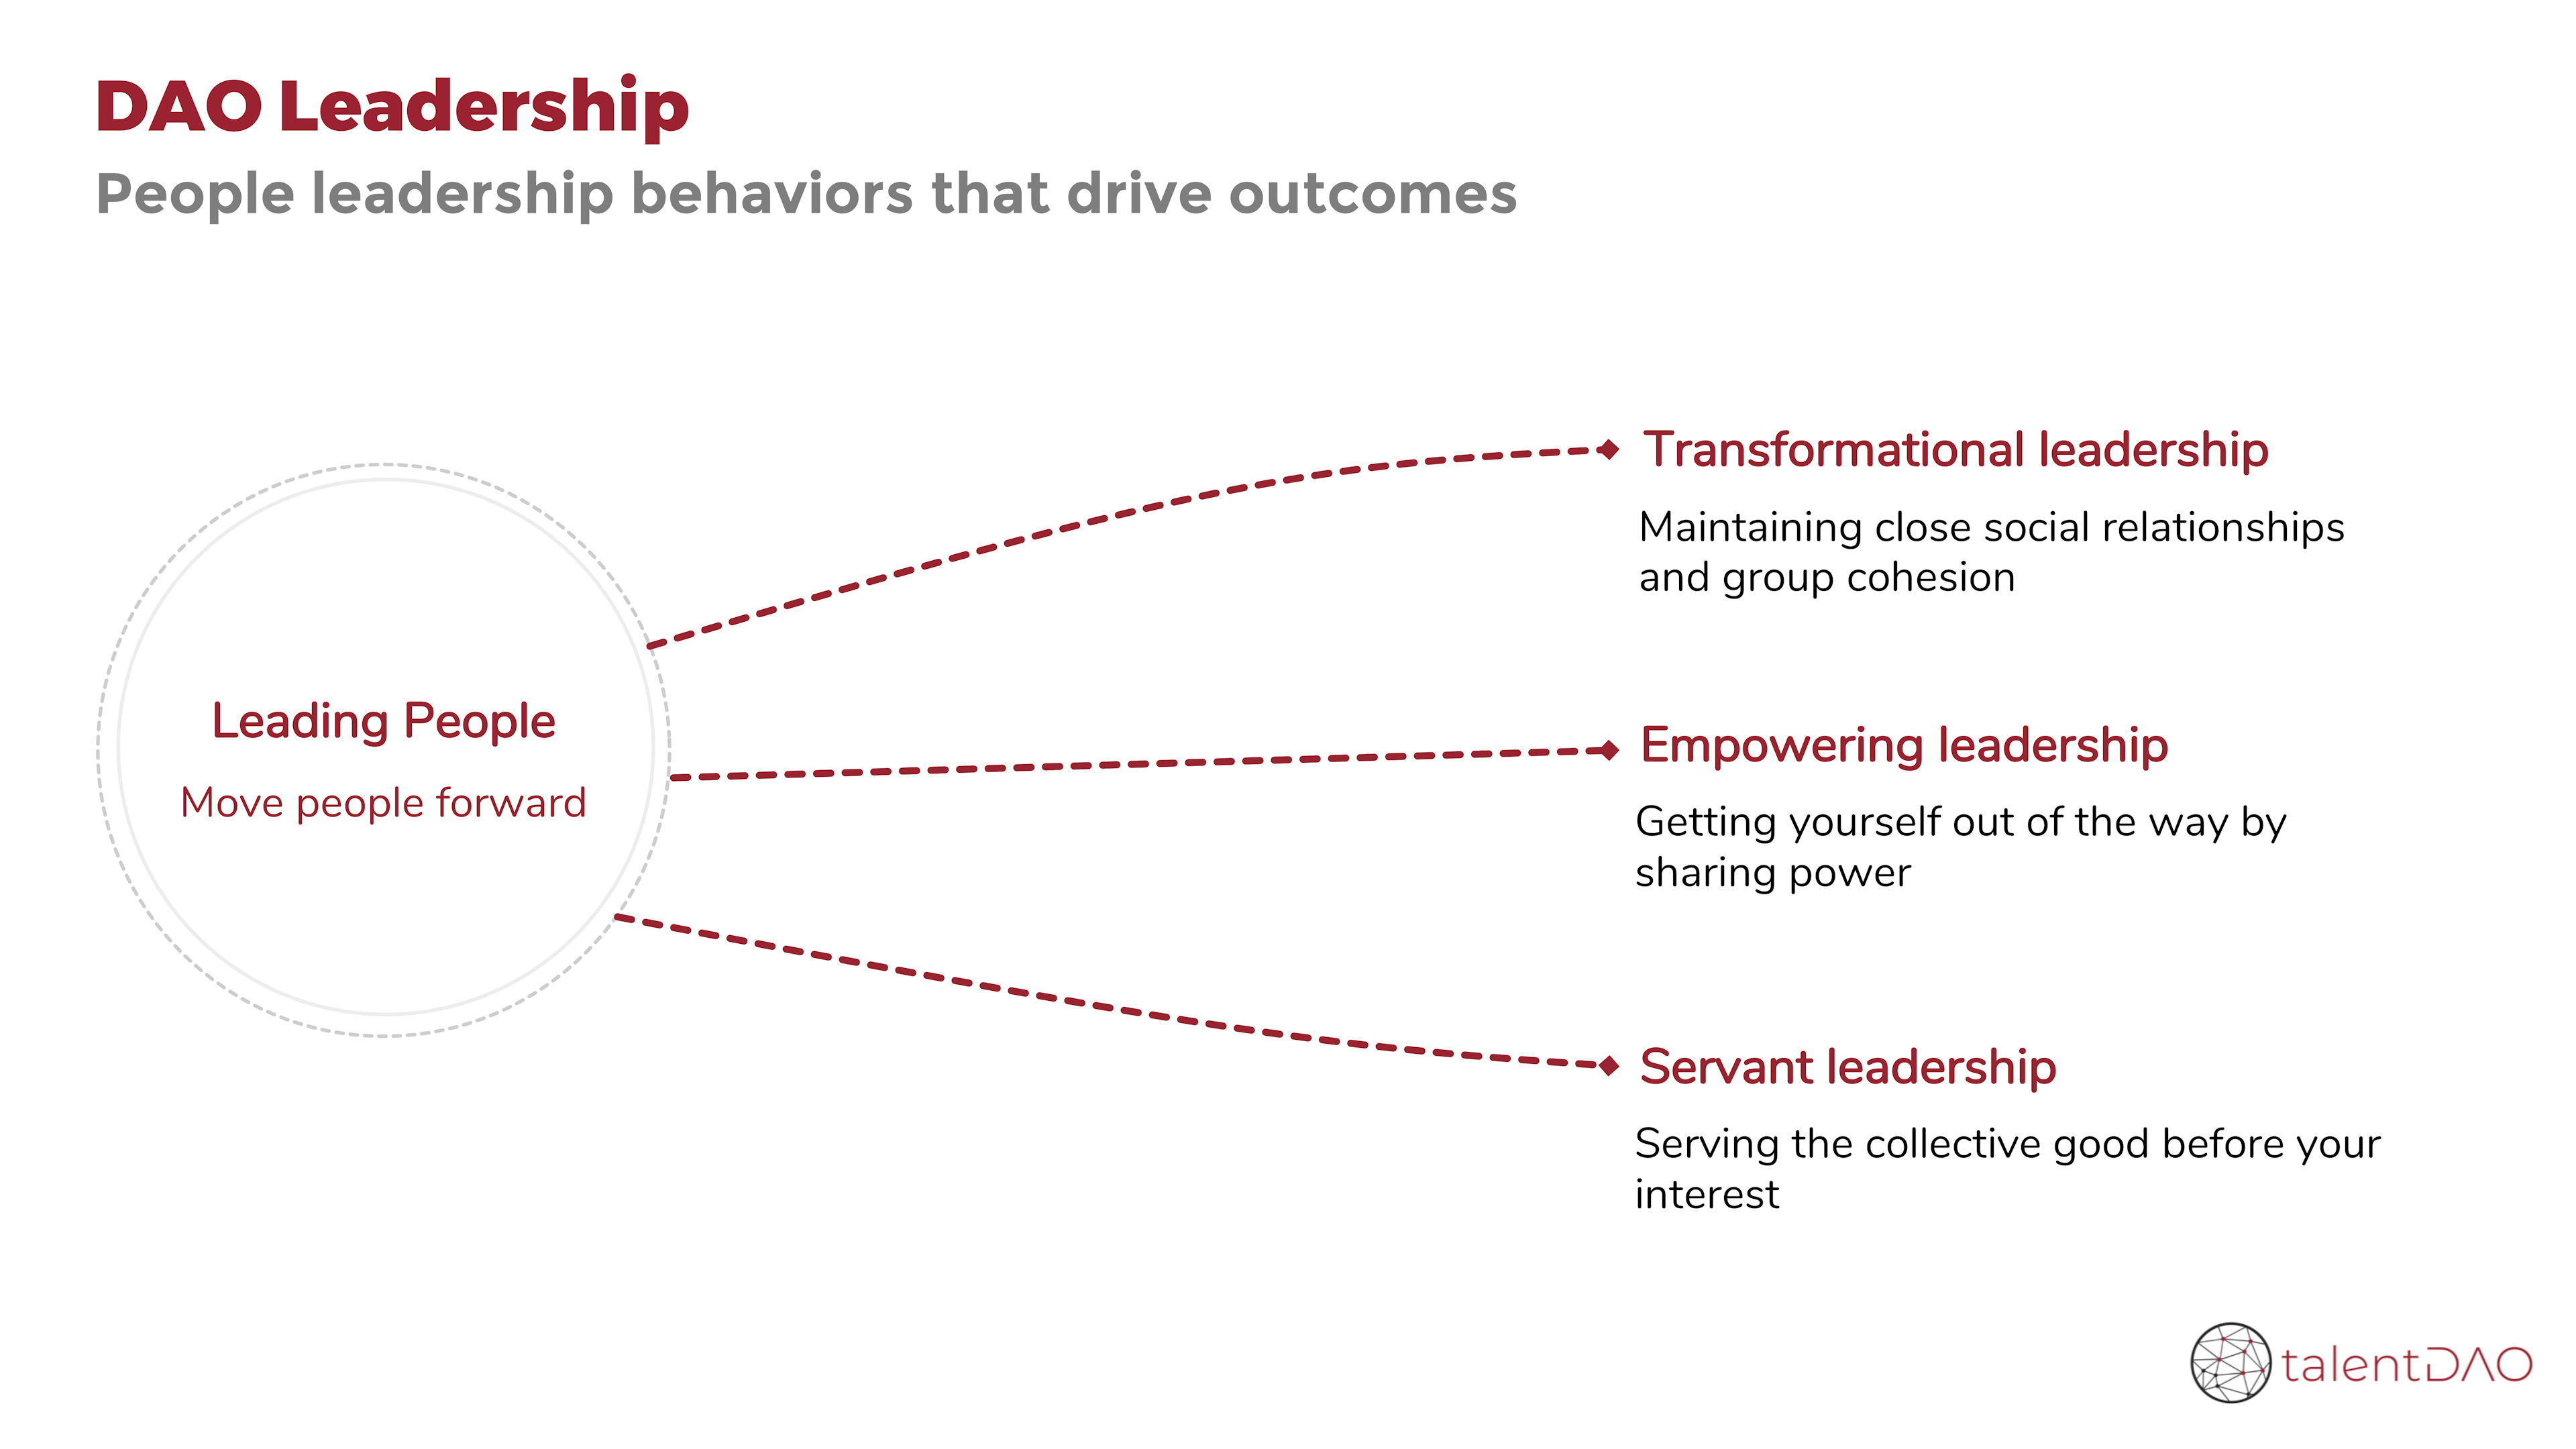 People leadership behaviors that drive outcomes